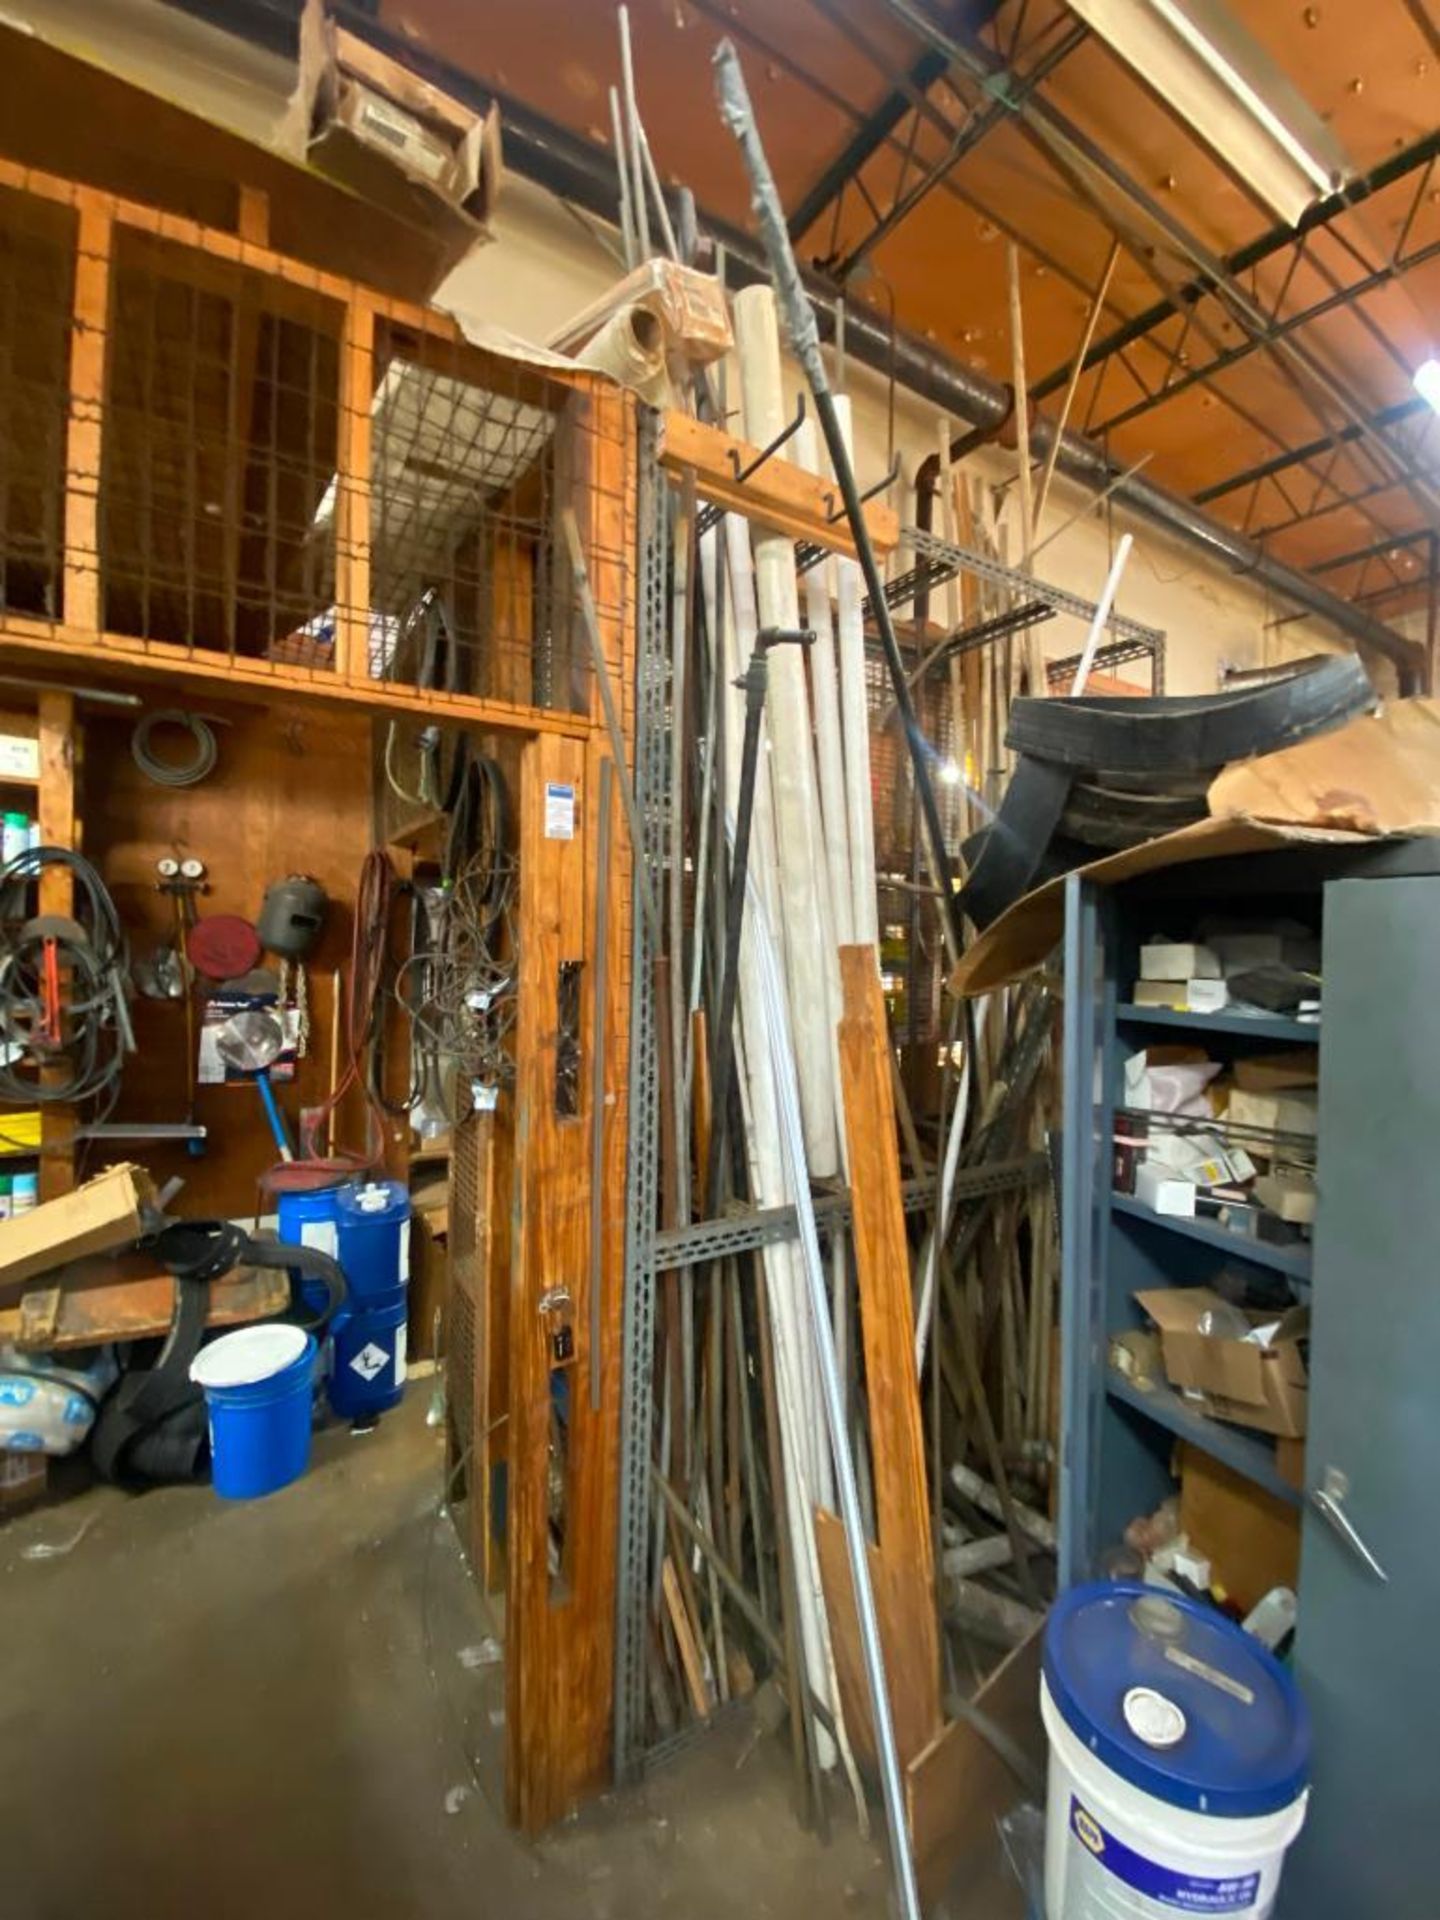 Assorted Contents Of Storage Room - Image 17 of 17